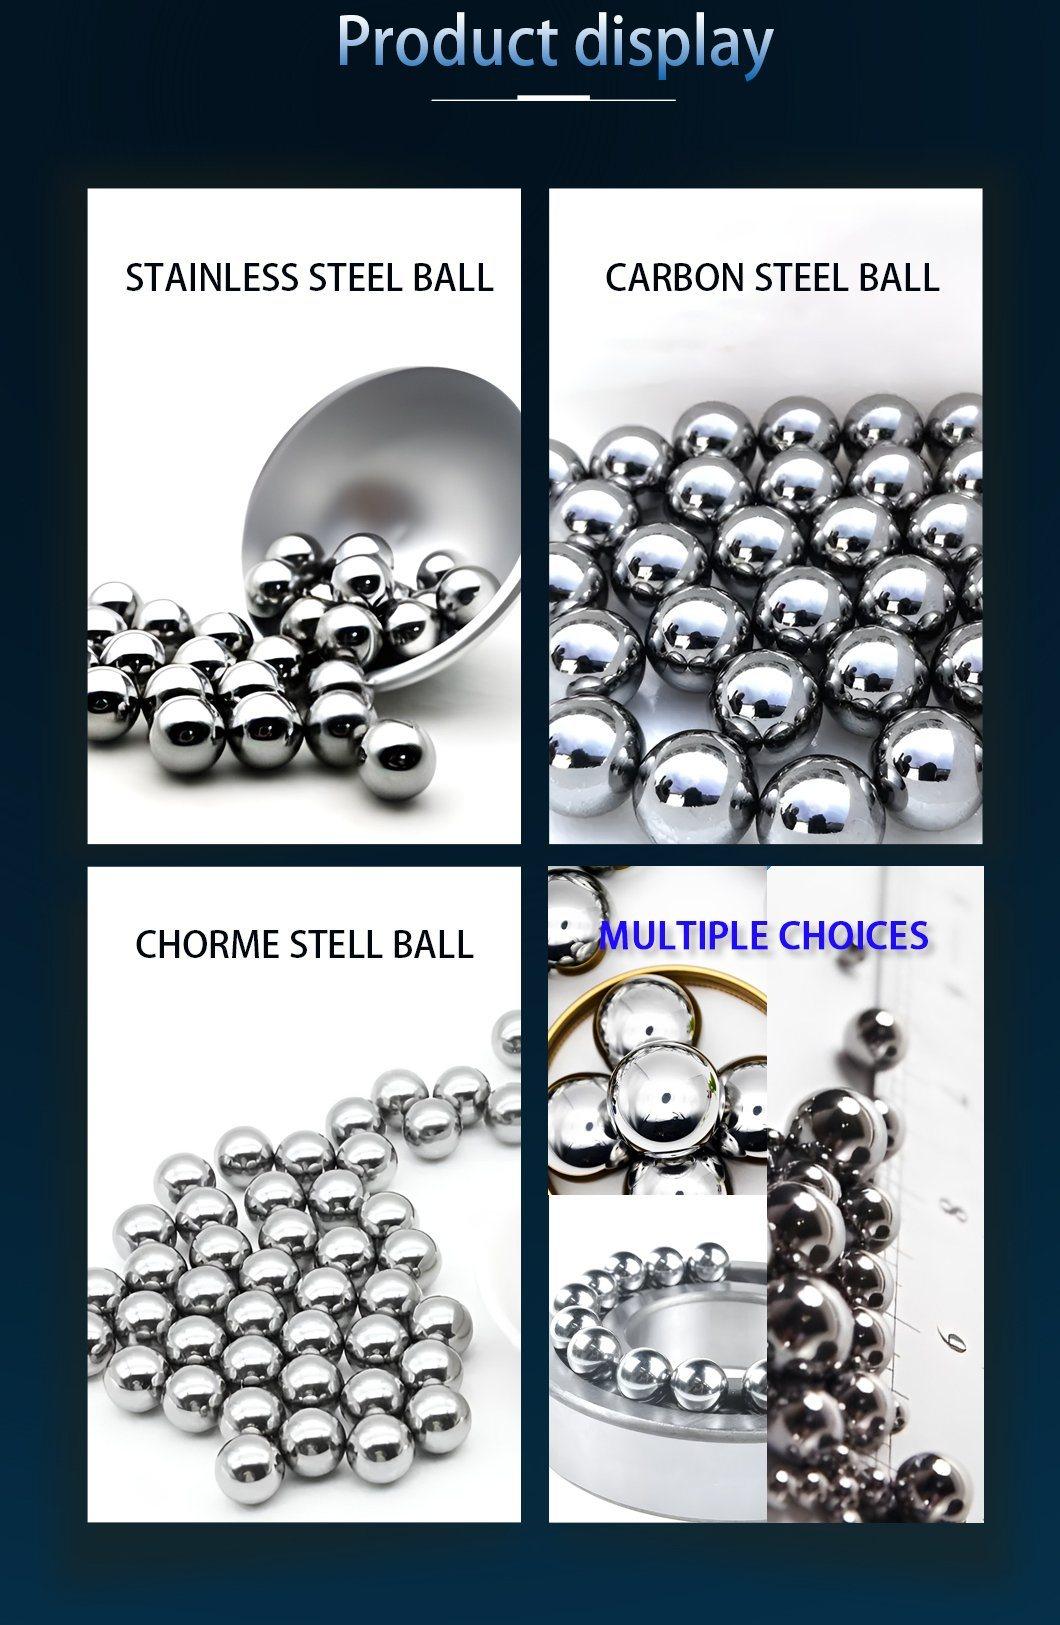 AISI G20-G1000 316 2mm Stainless Steel Balls for Sale